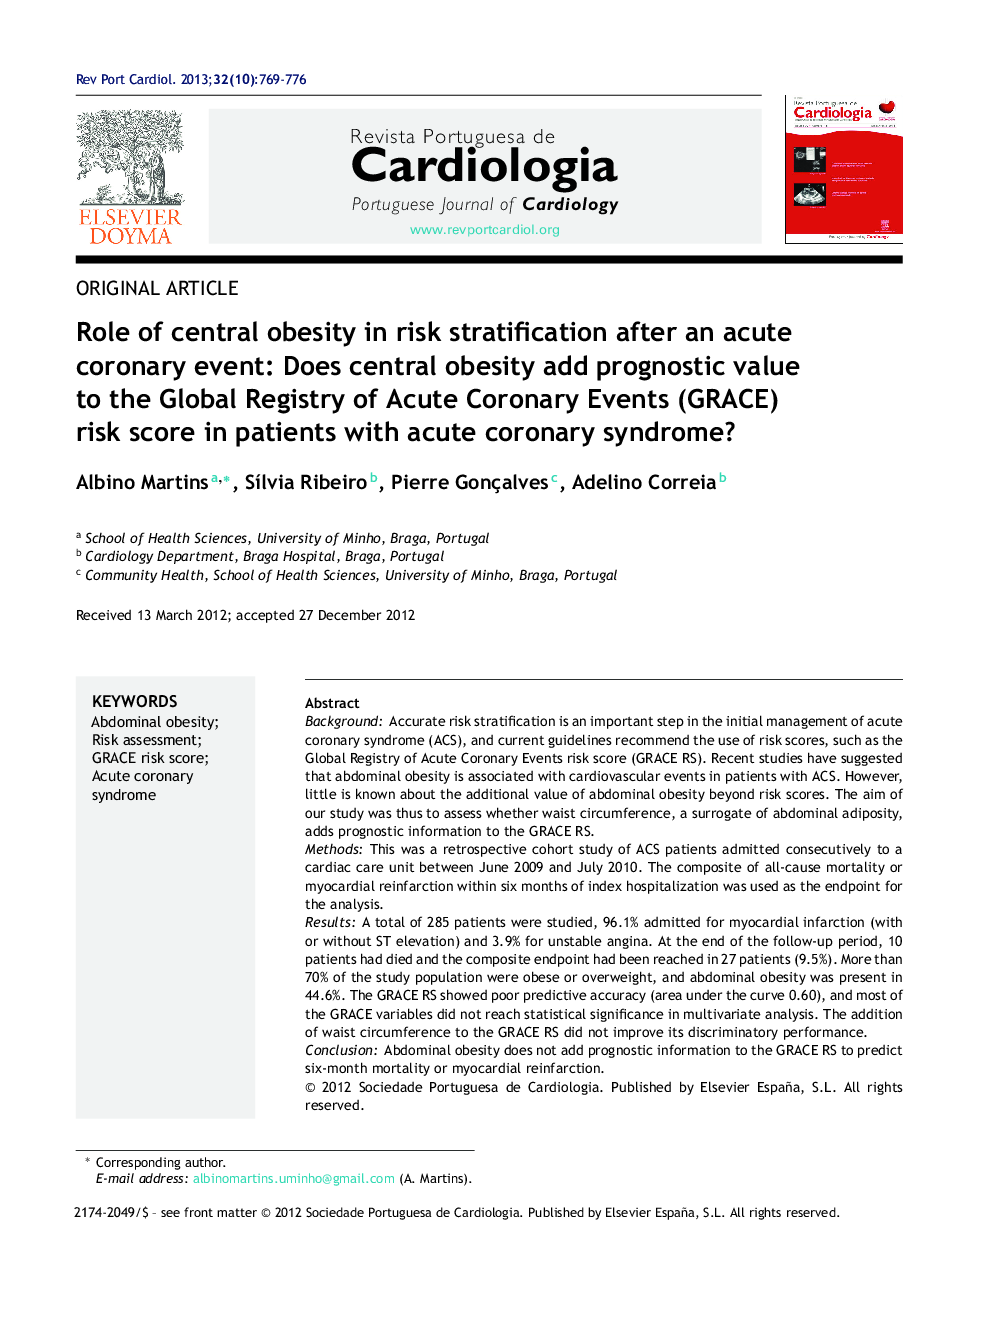 Role of central obesity in risk stratification after an acute coronary event: Does central obesity add prognostic value to the Global Registry of Acute Coronary Events (GRACE) risk score in patients with acute coronary syndrome?